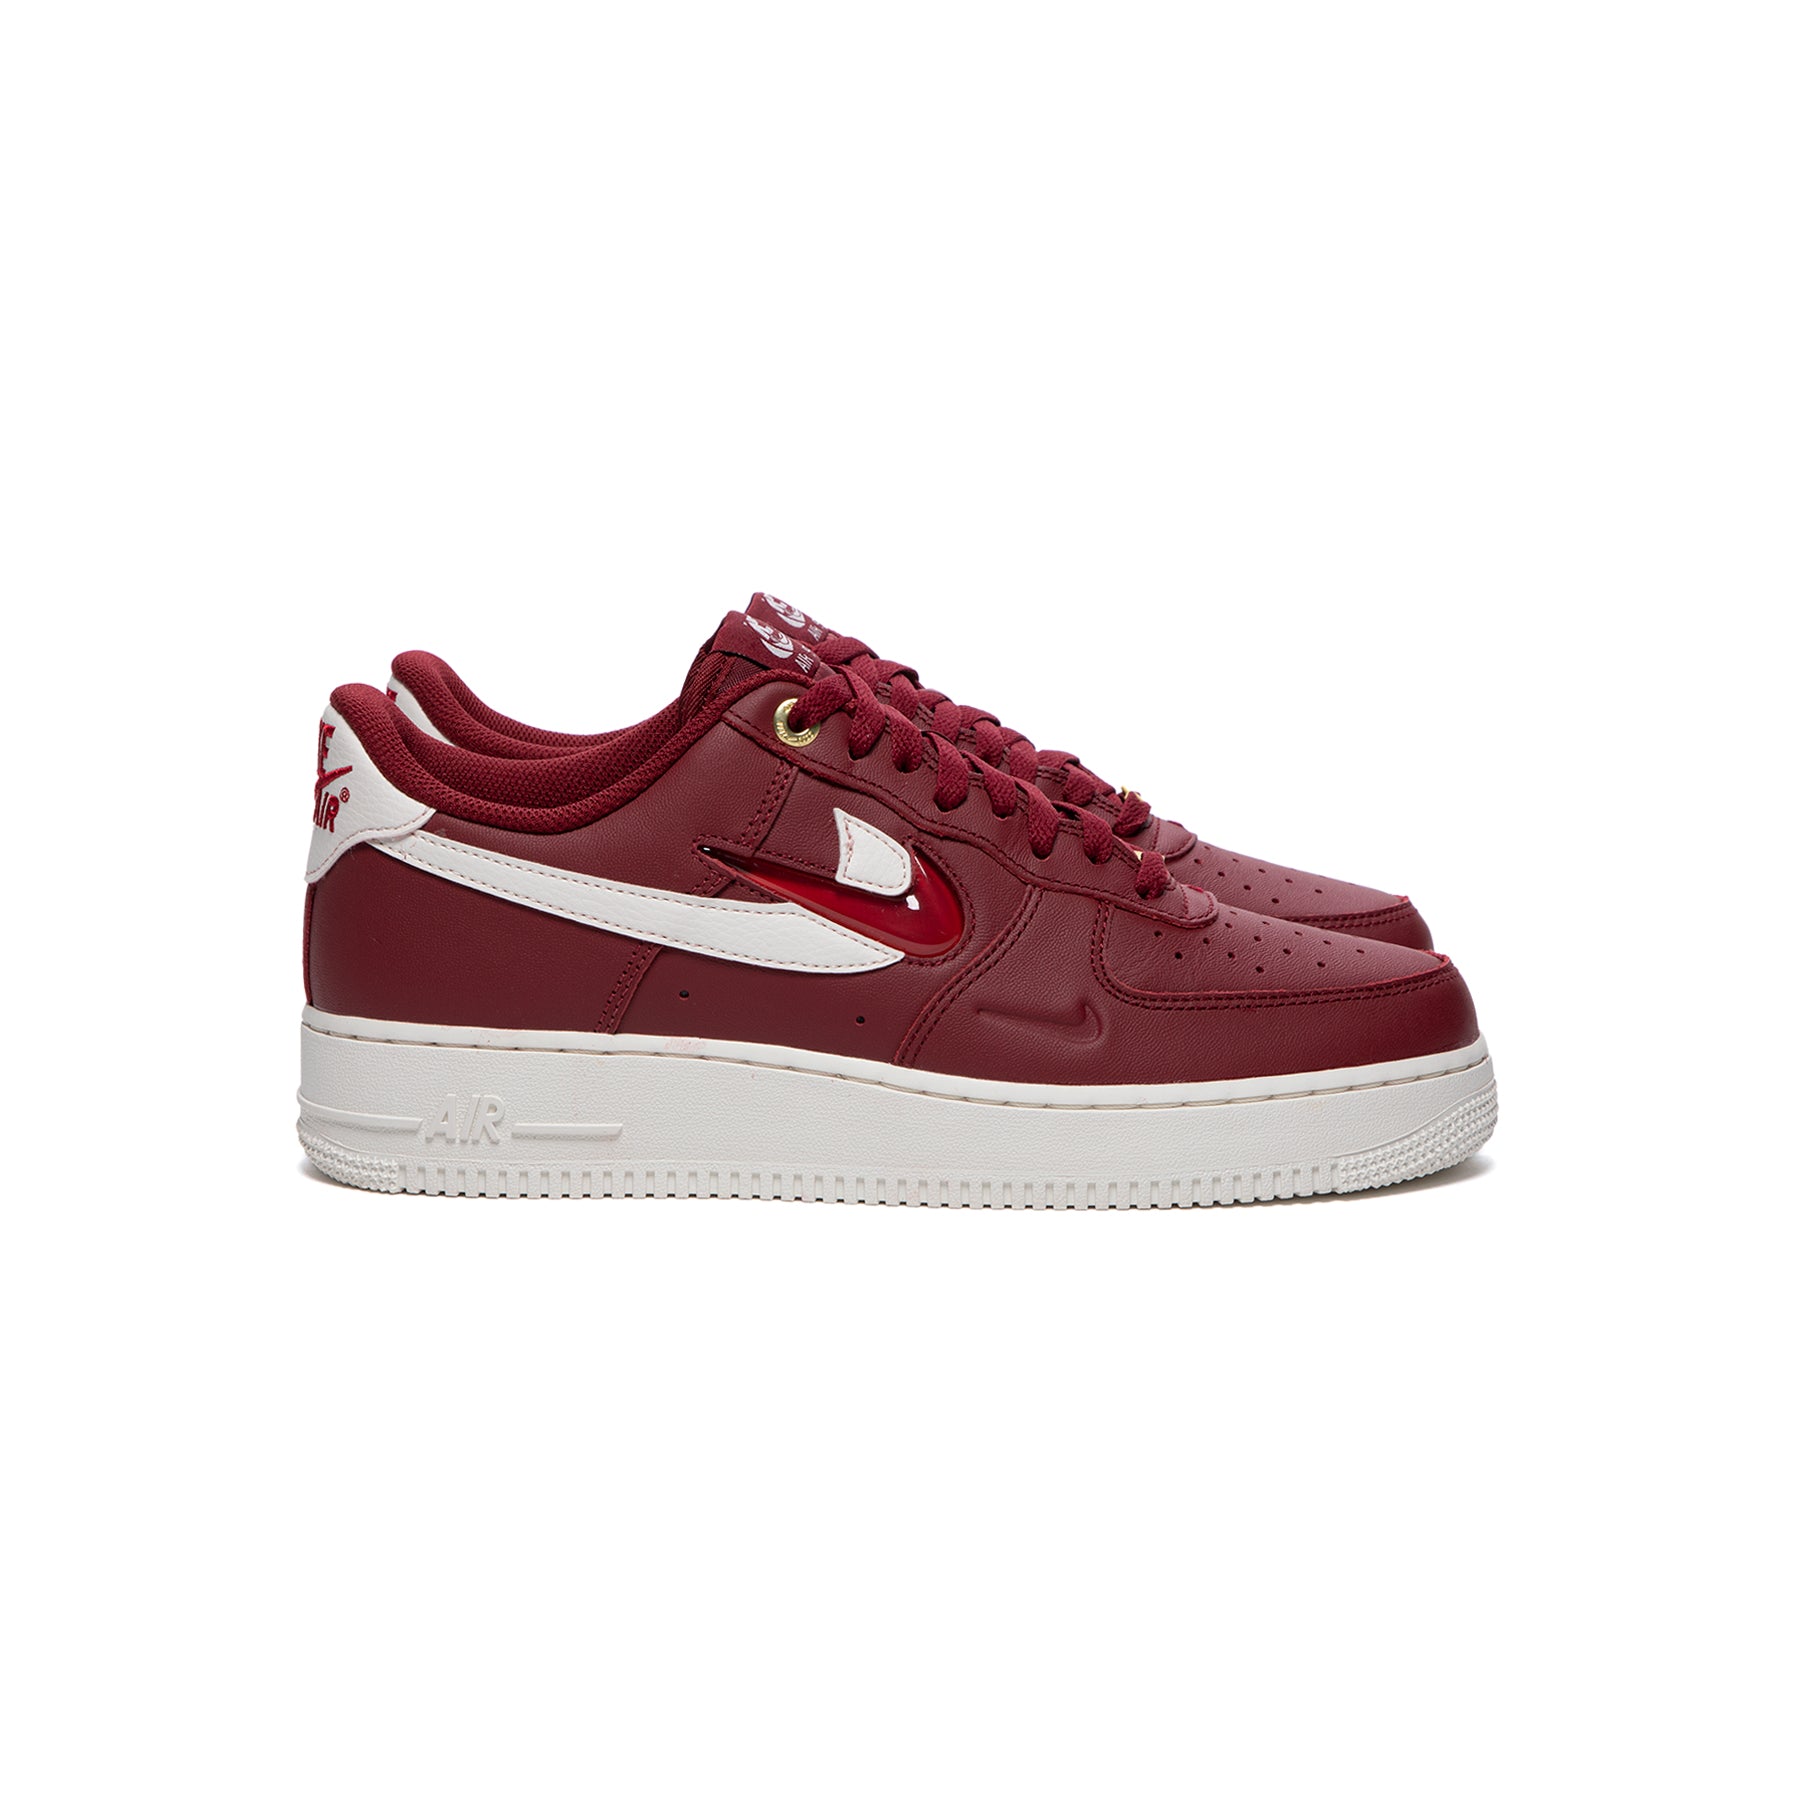 operator motor waterbestendig Nike Air Force 1 '07 PRM (Team Red/Sail/Gym Red) – Concepts